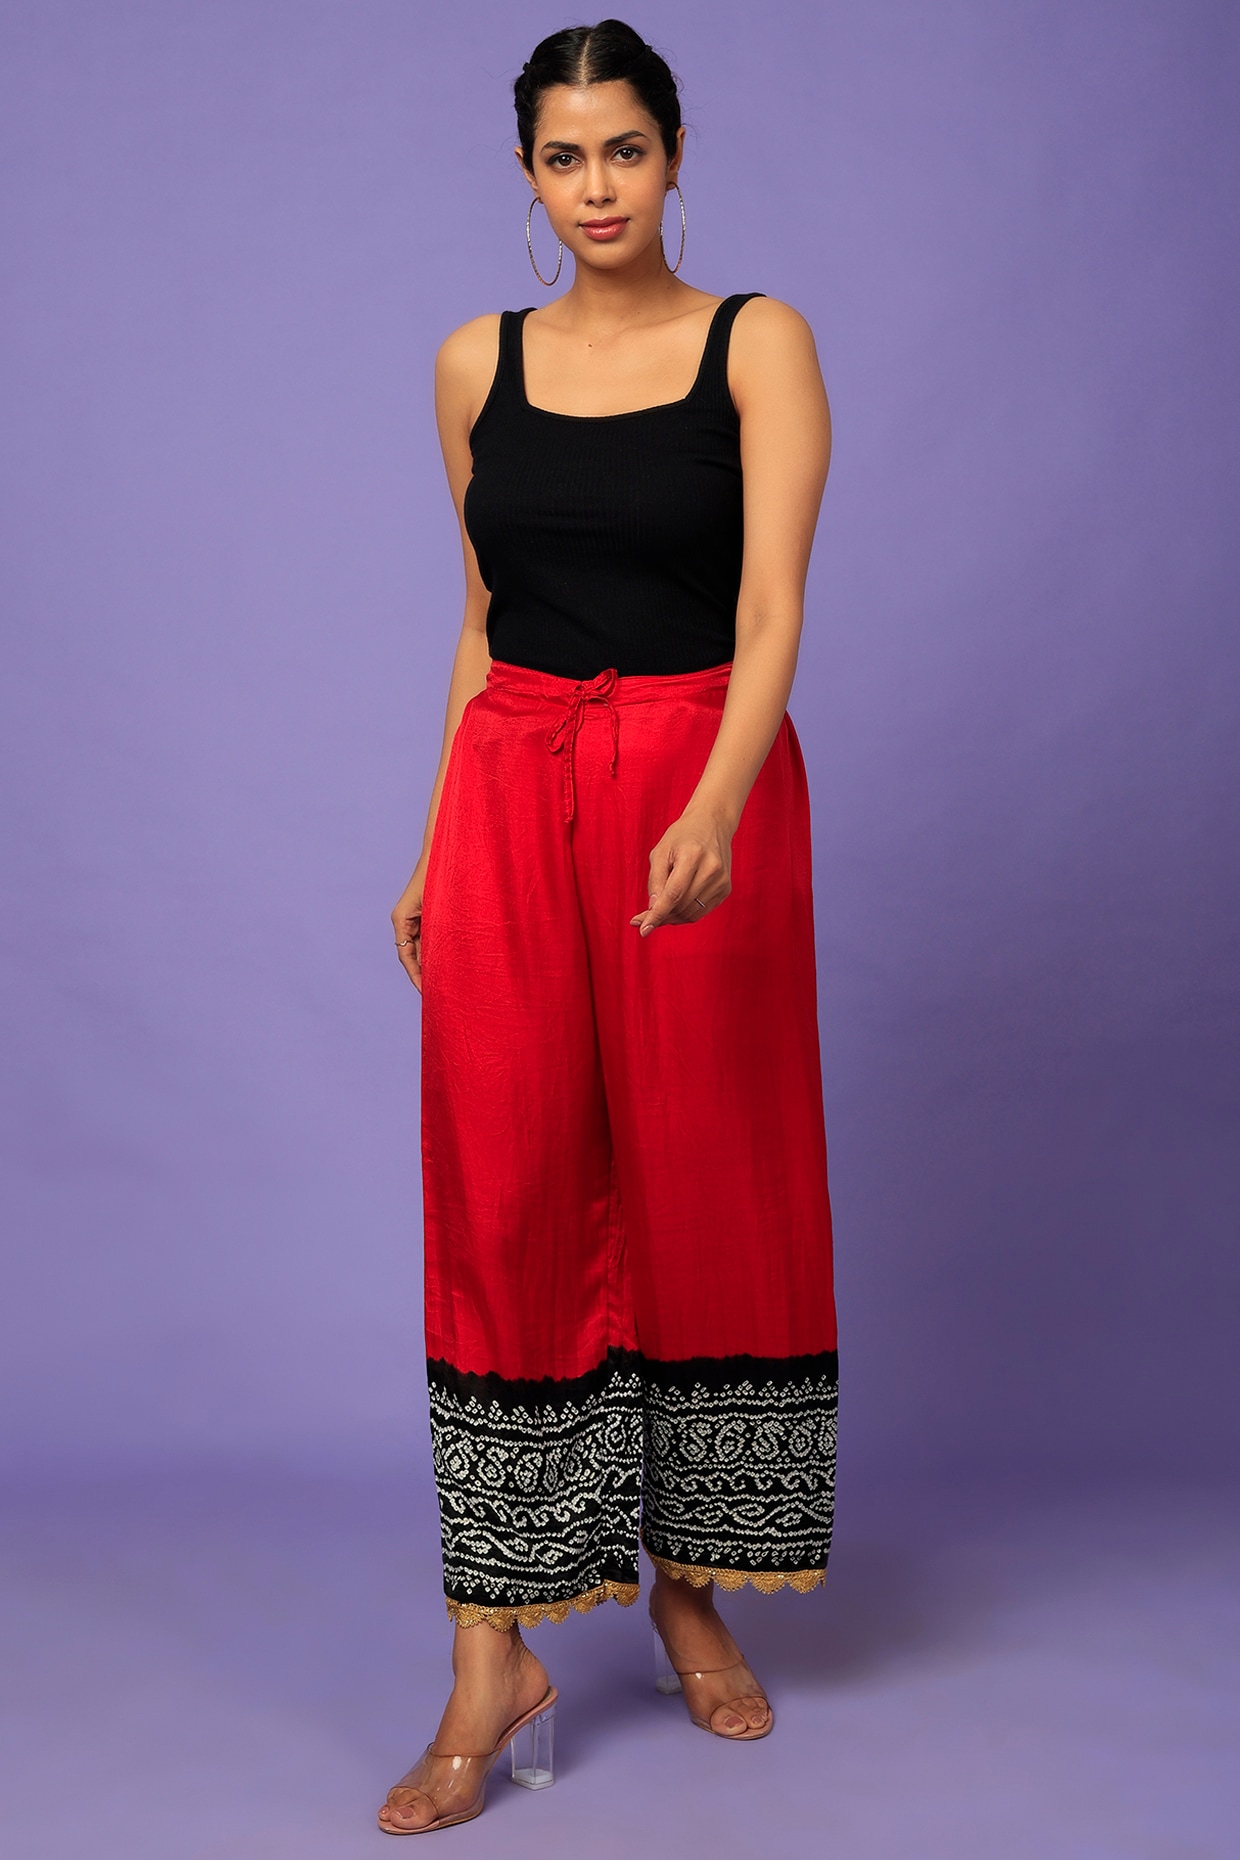 Curves Red Ditsy Floral Wide Leg Crop Trousers  New Look